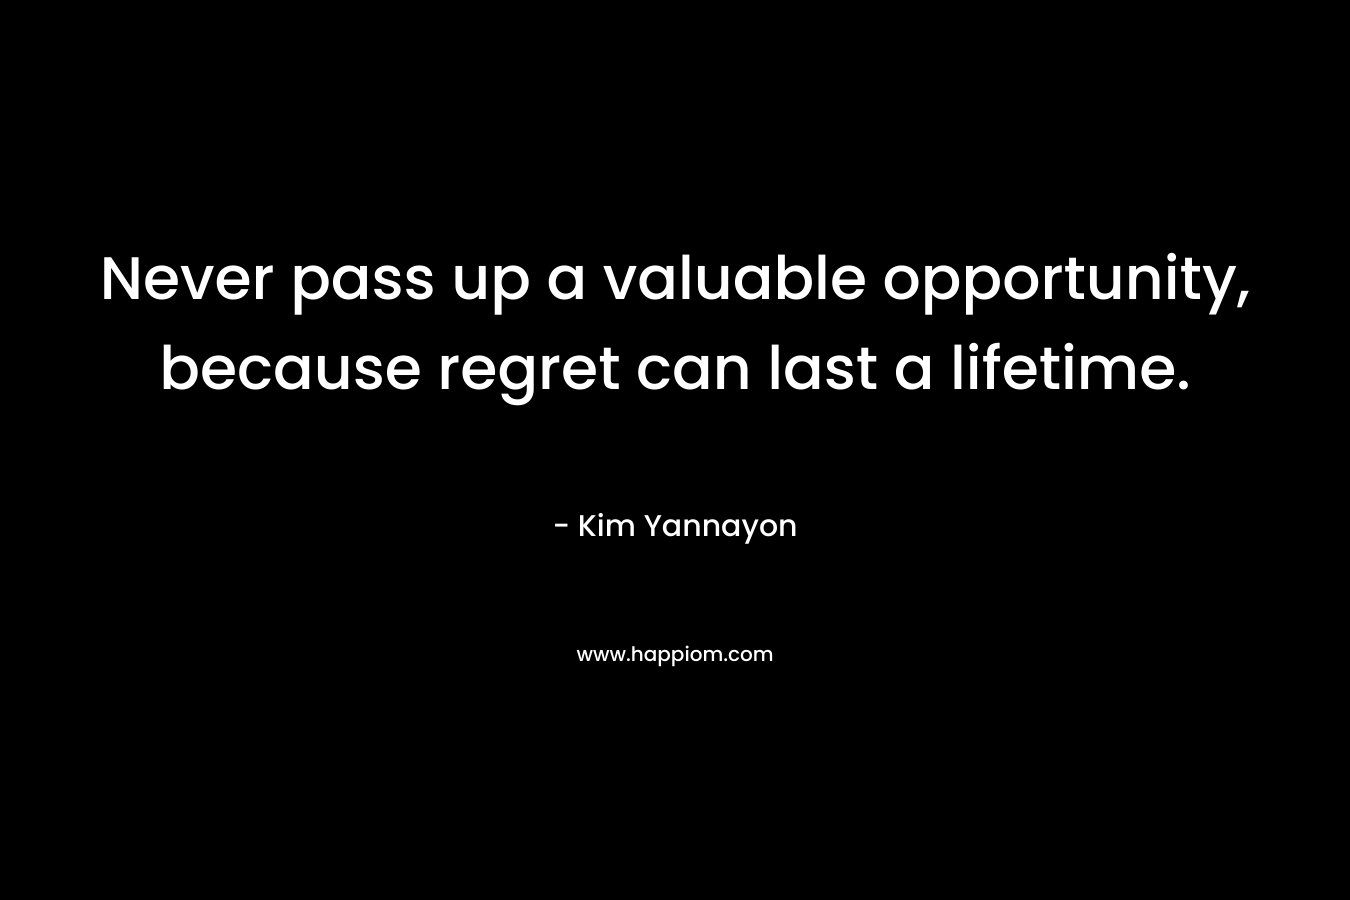 Never pass up a valuable opportunity, because regret can last a lifetime.